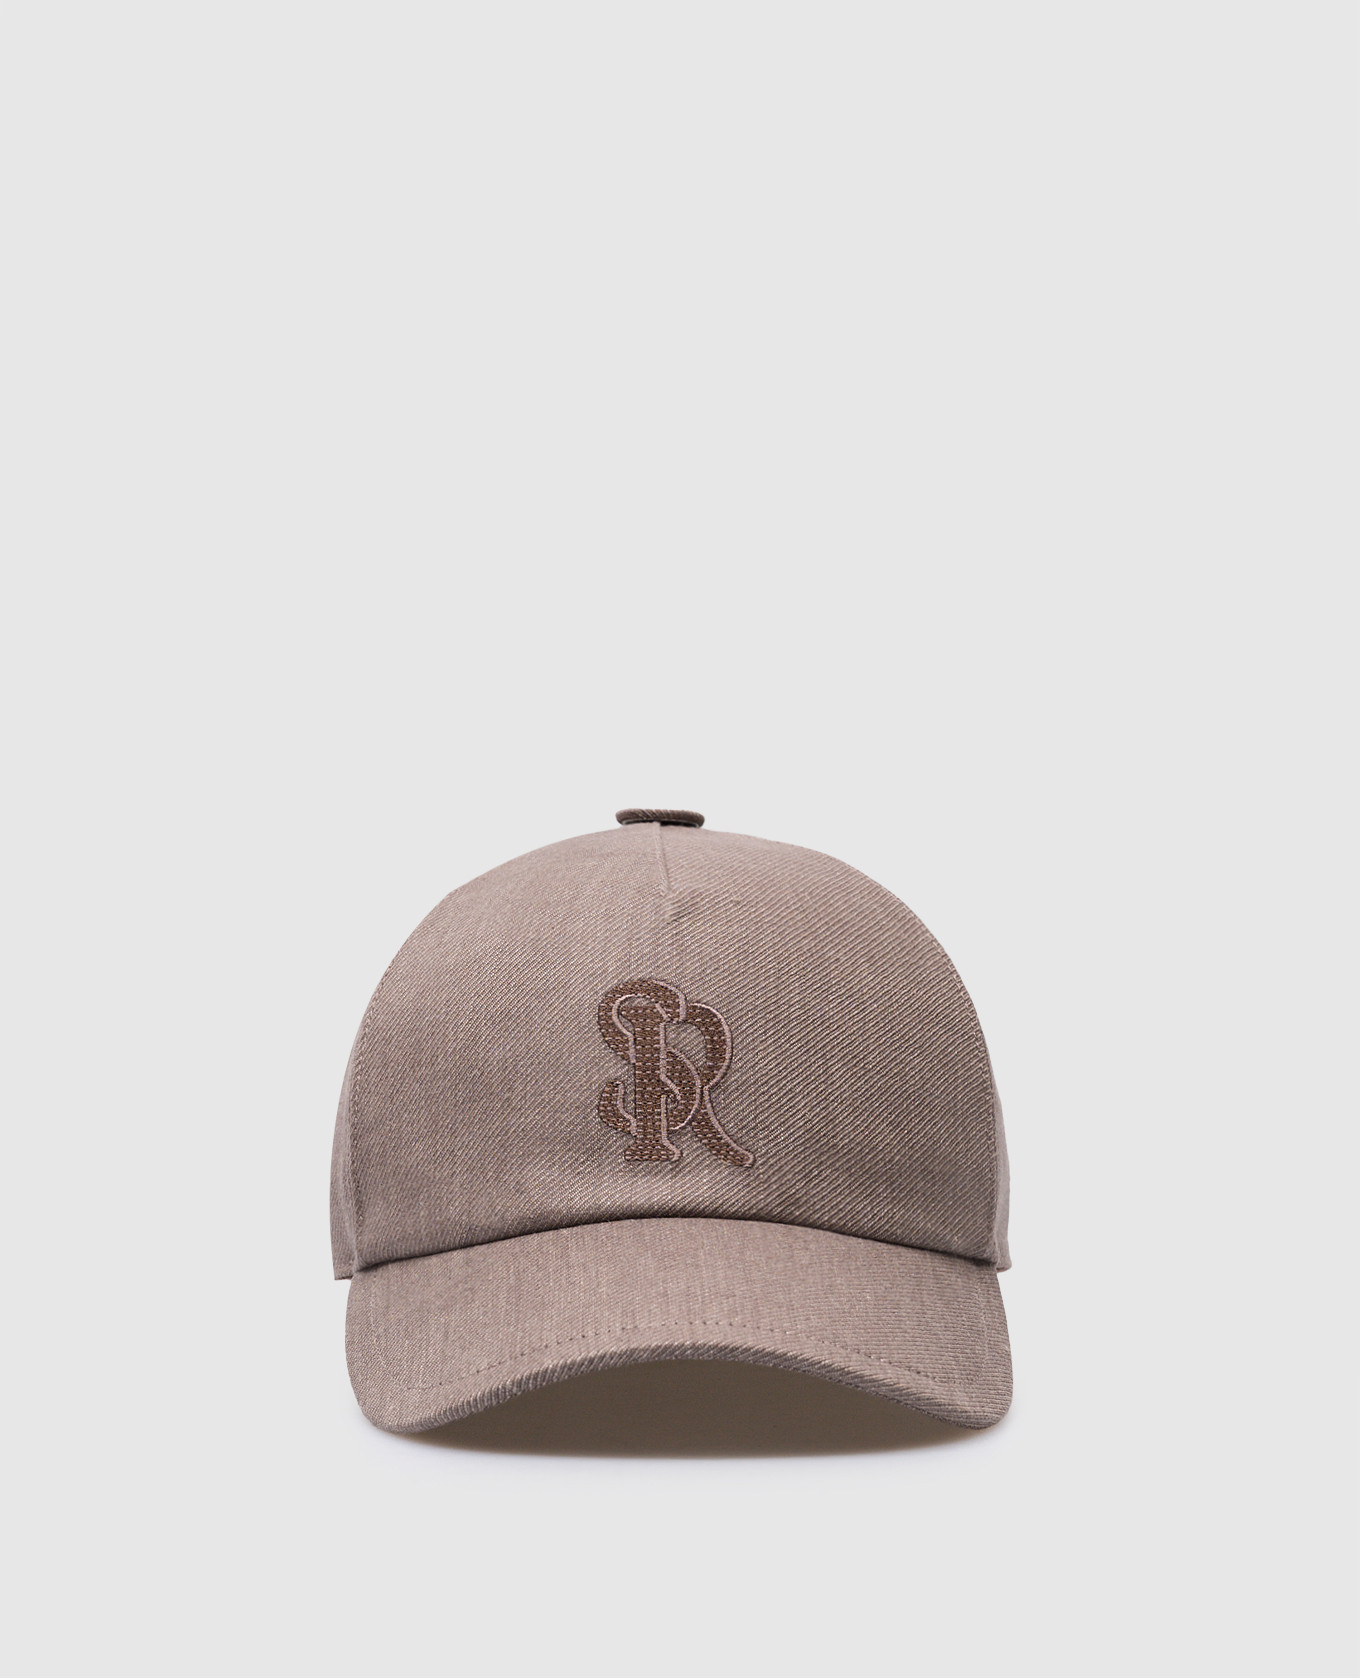 Brown linen and wool cap with monogram logo embroidery